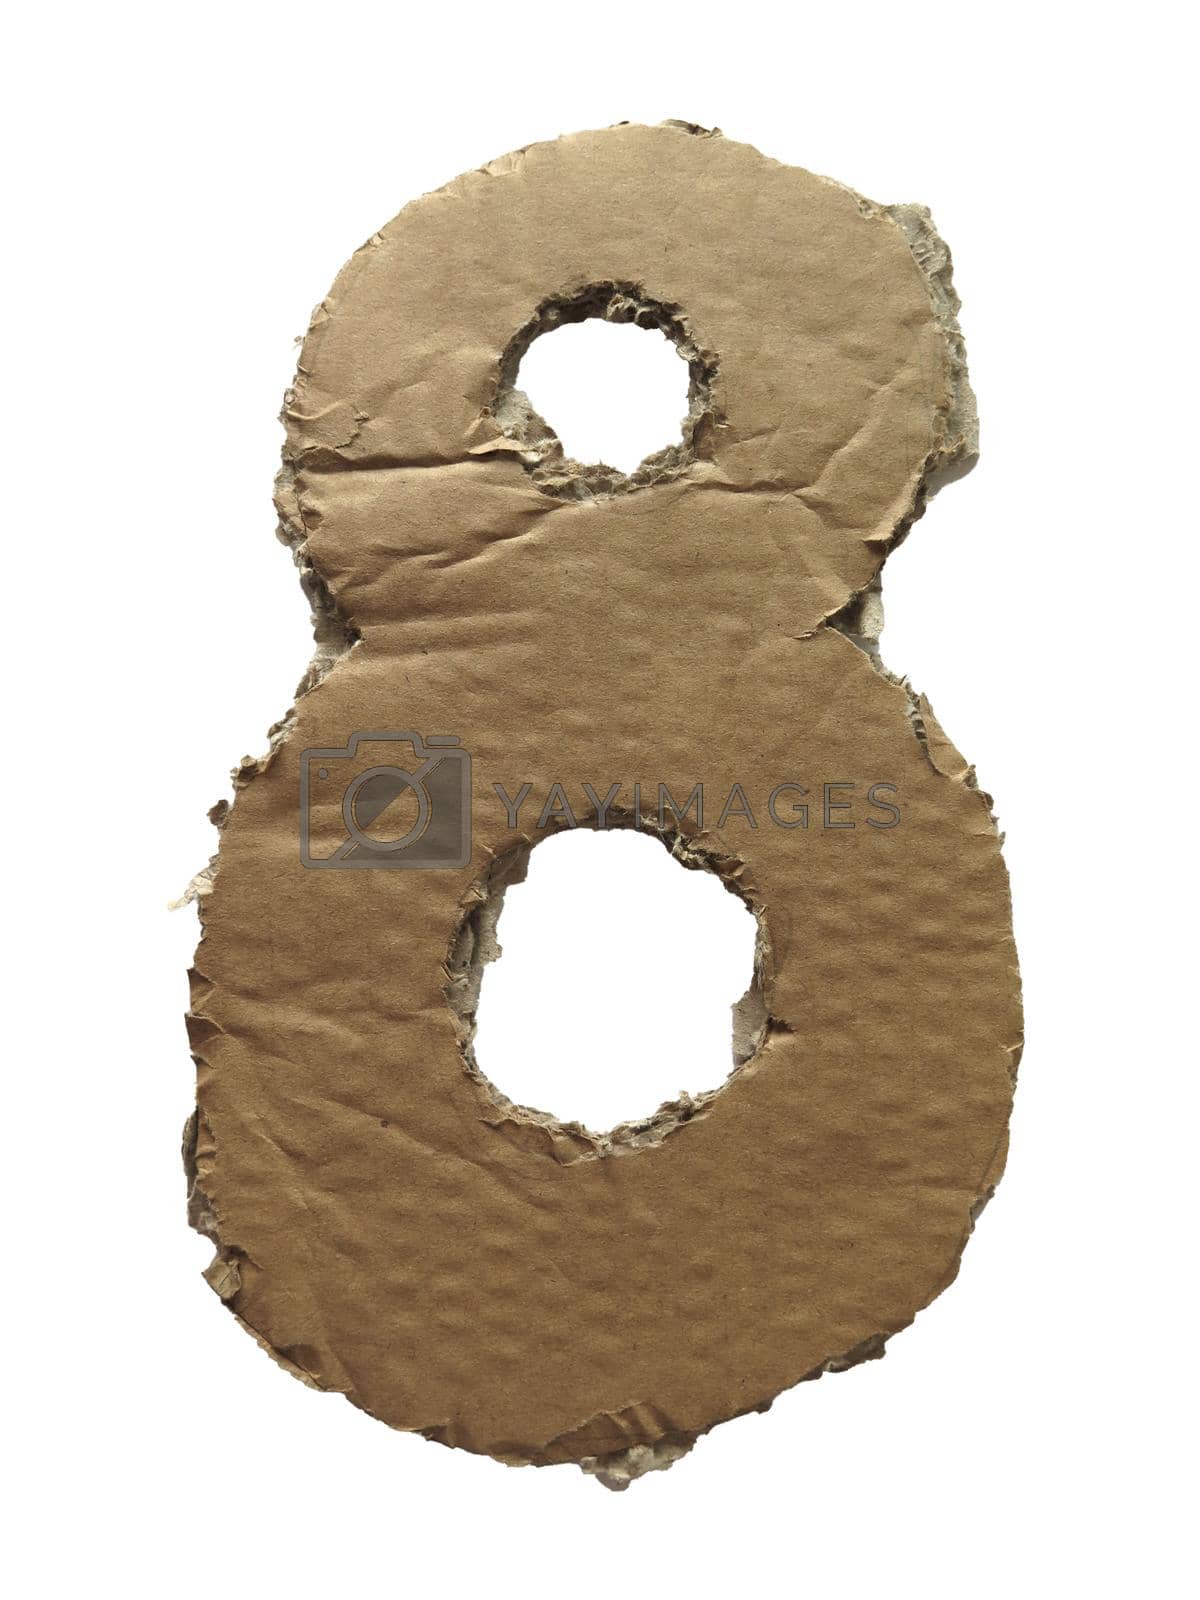 Royalty free image of Cardboard texture Number 8 by aroas